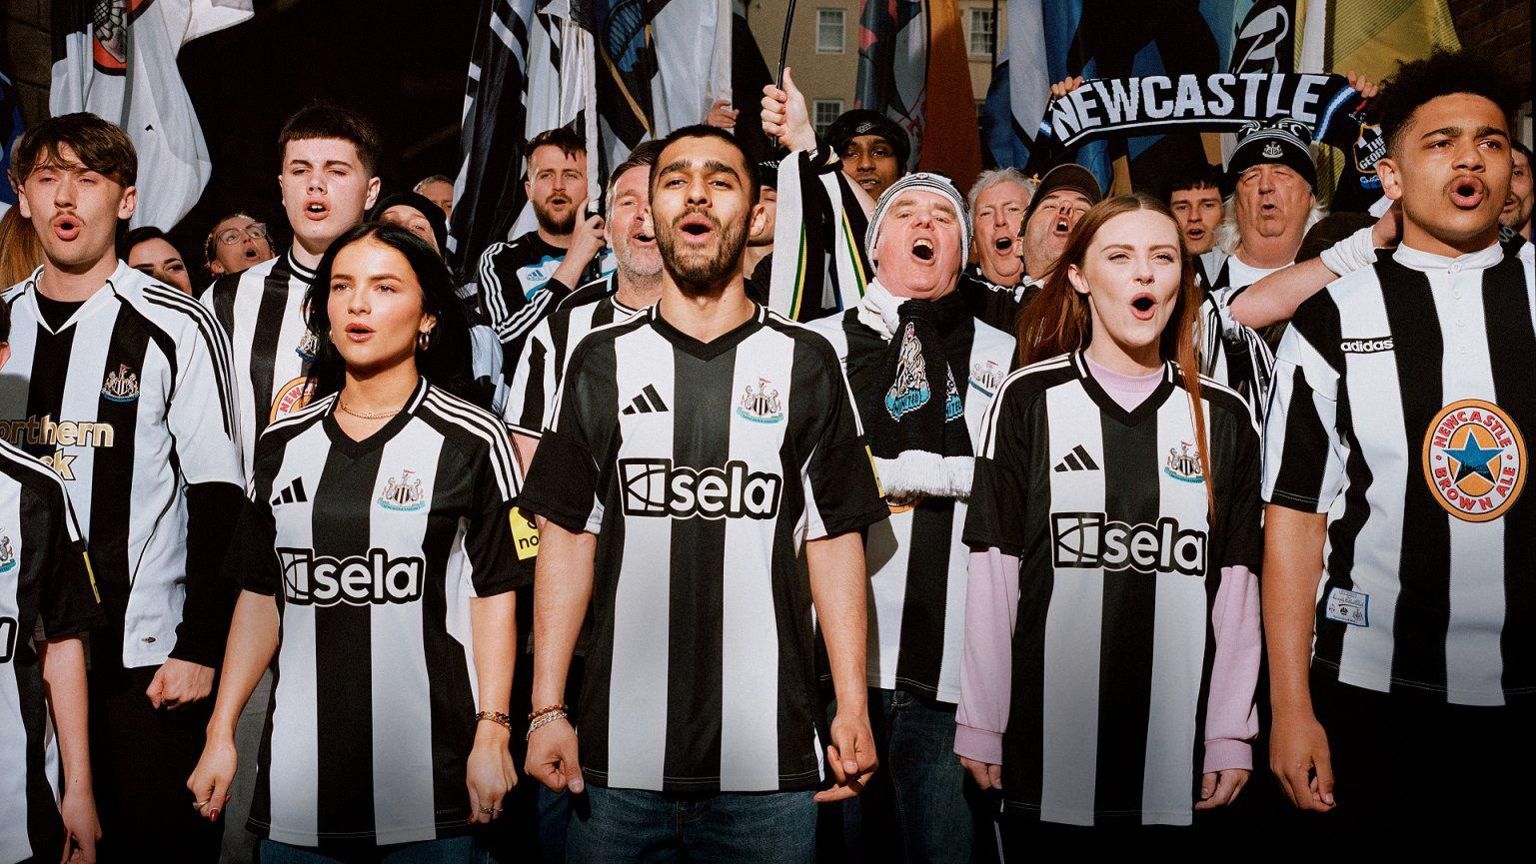 Fans wear Newcastle United's new home shirt alongside supporters decked out in previous Adidas jerseys